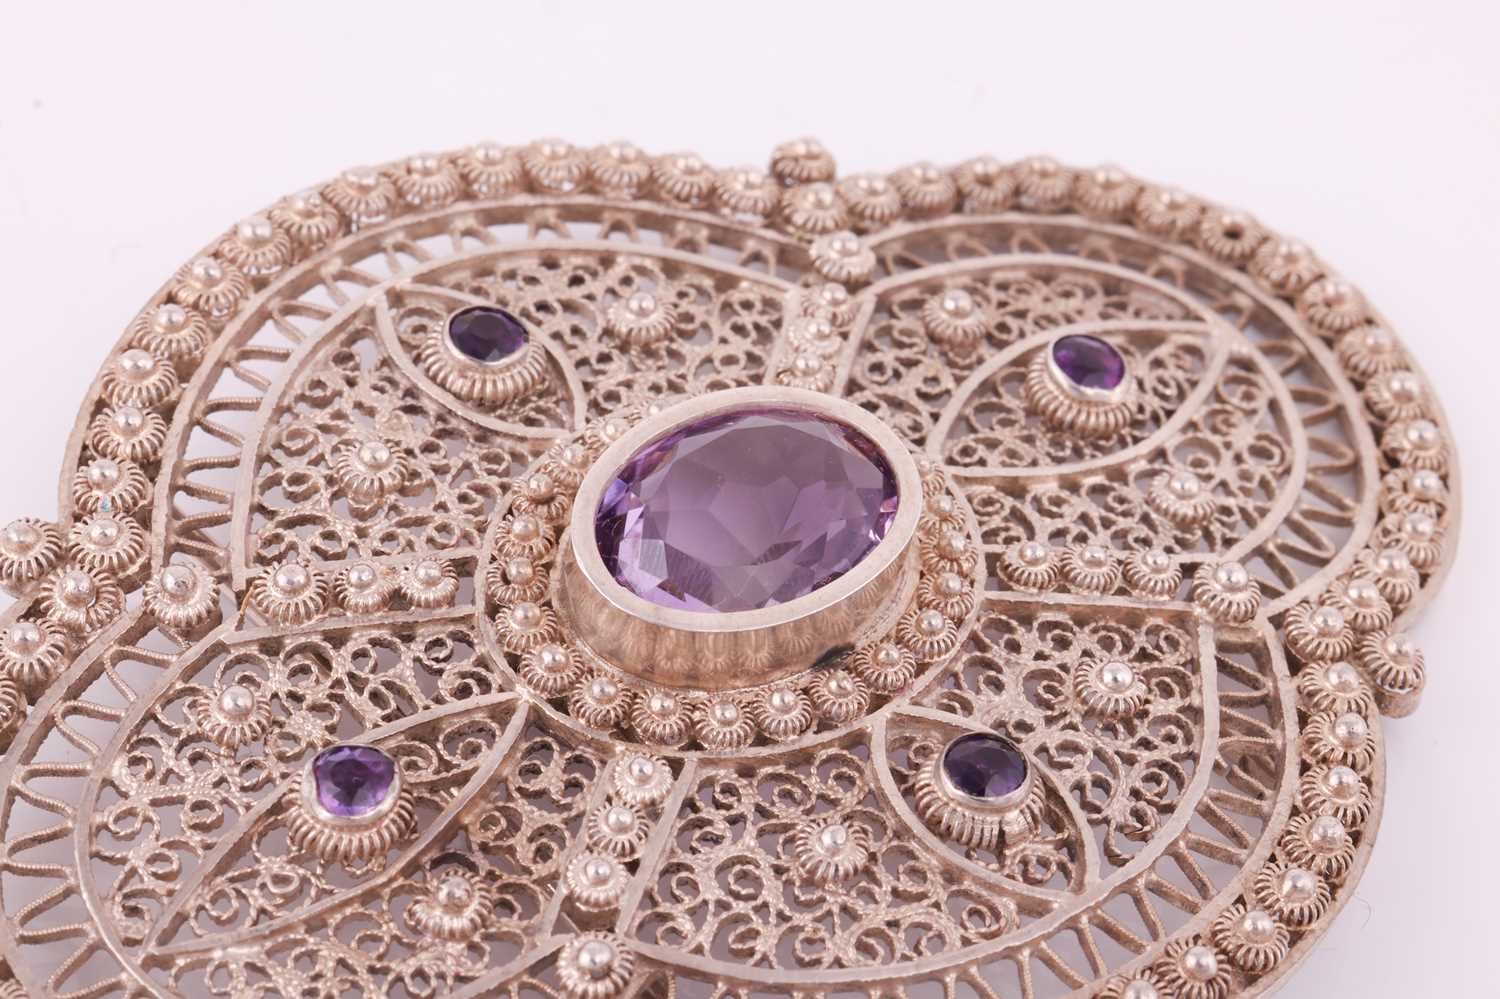 Two gem-set buckles; the first buckle of quatrefoil form, decorated with openwork filigree design an - Image 4 of 5